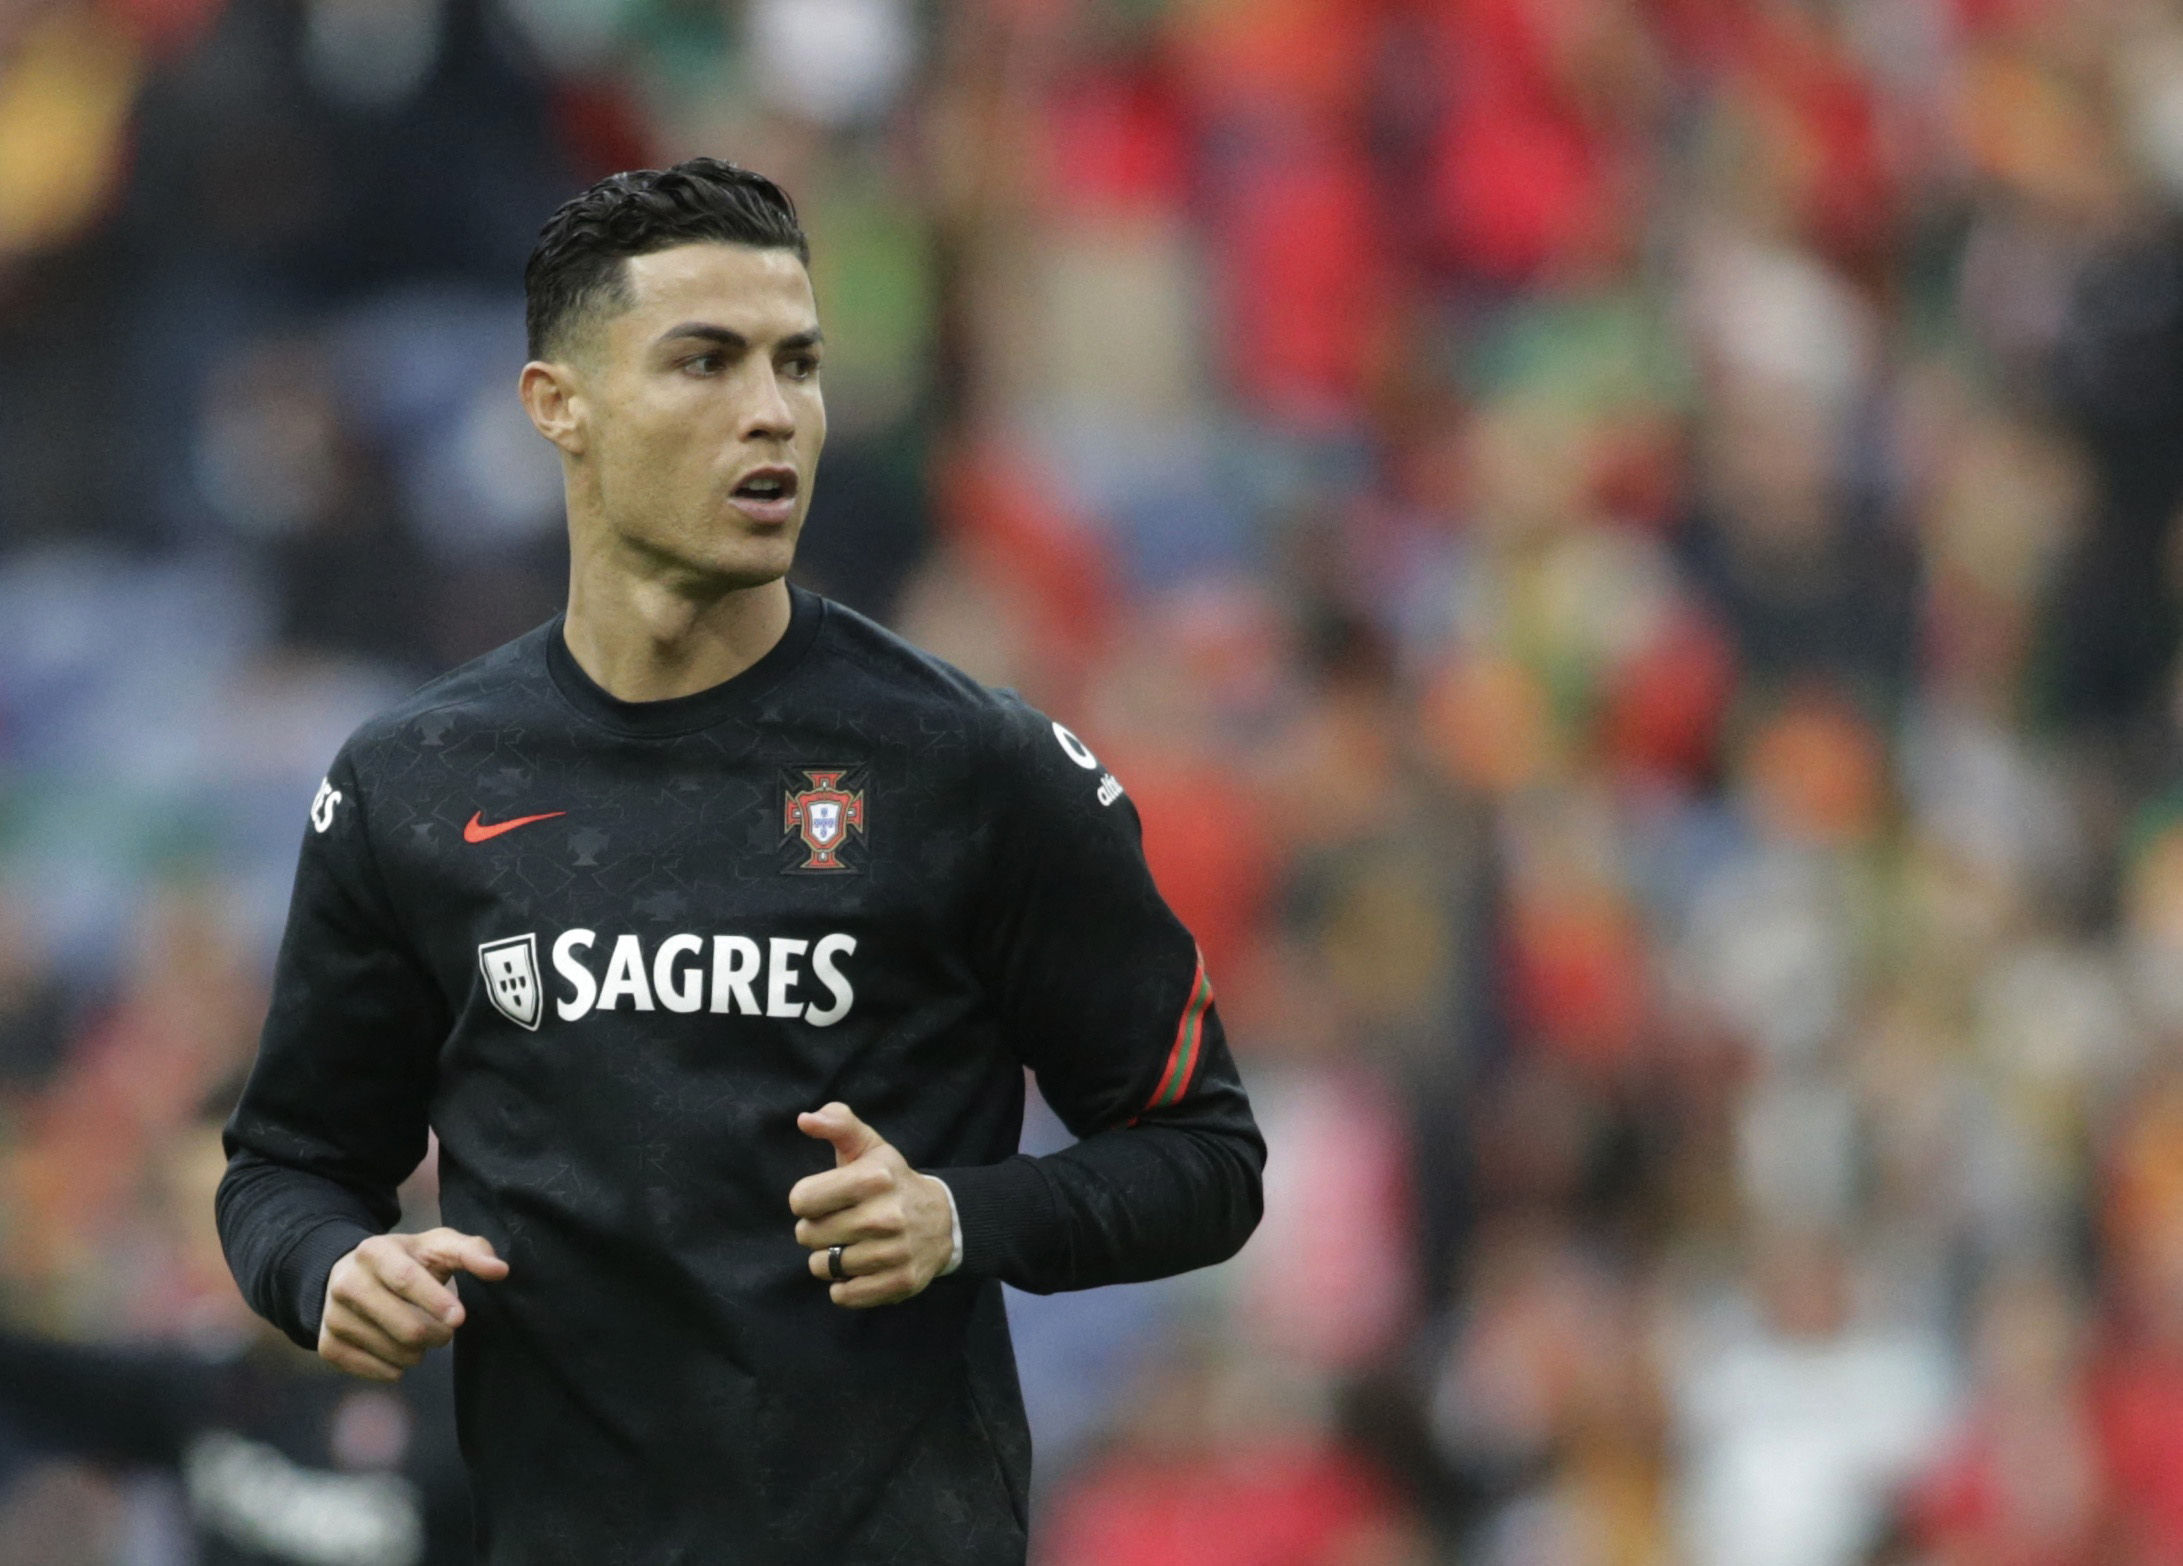 FILE PHOTO: Football - World Cup - UEFA Qualifiers - First leg Final C - Portugal and North Macedonia - Estadio do Dragao, Porto, Portugal - March 29, 2022 Cristiano Ronaldo of Portugal in the kick-off move before the game 